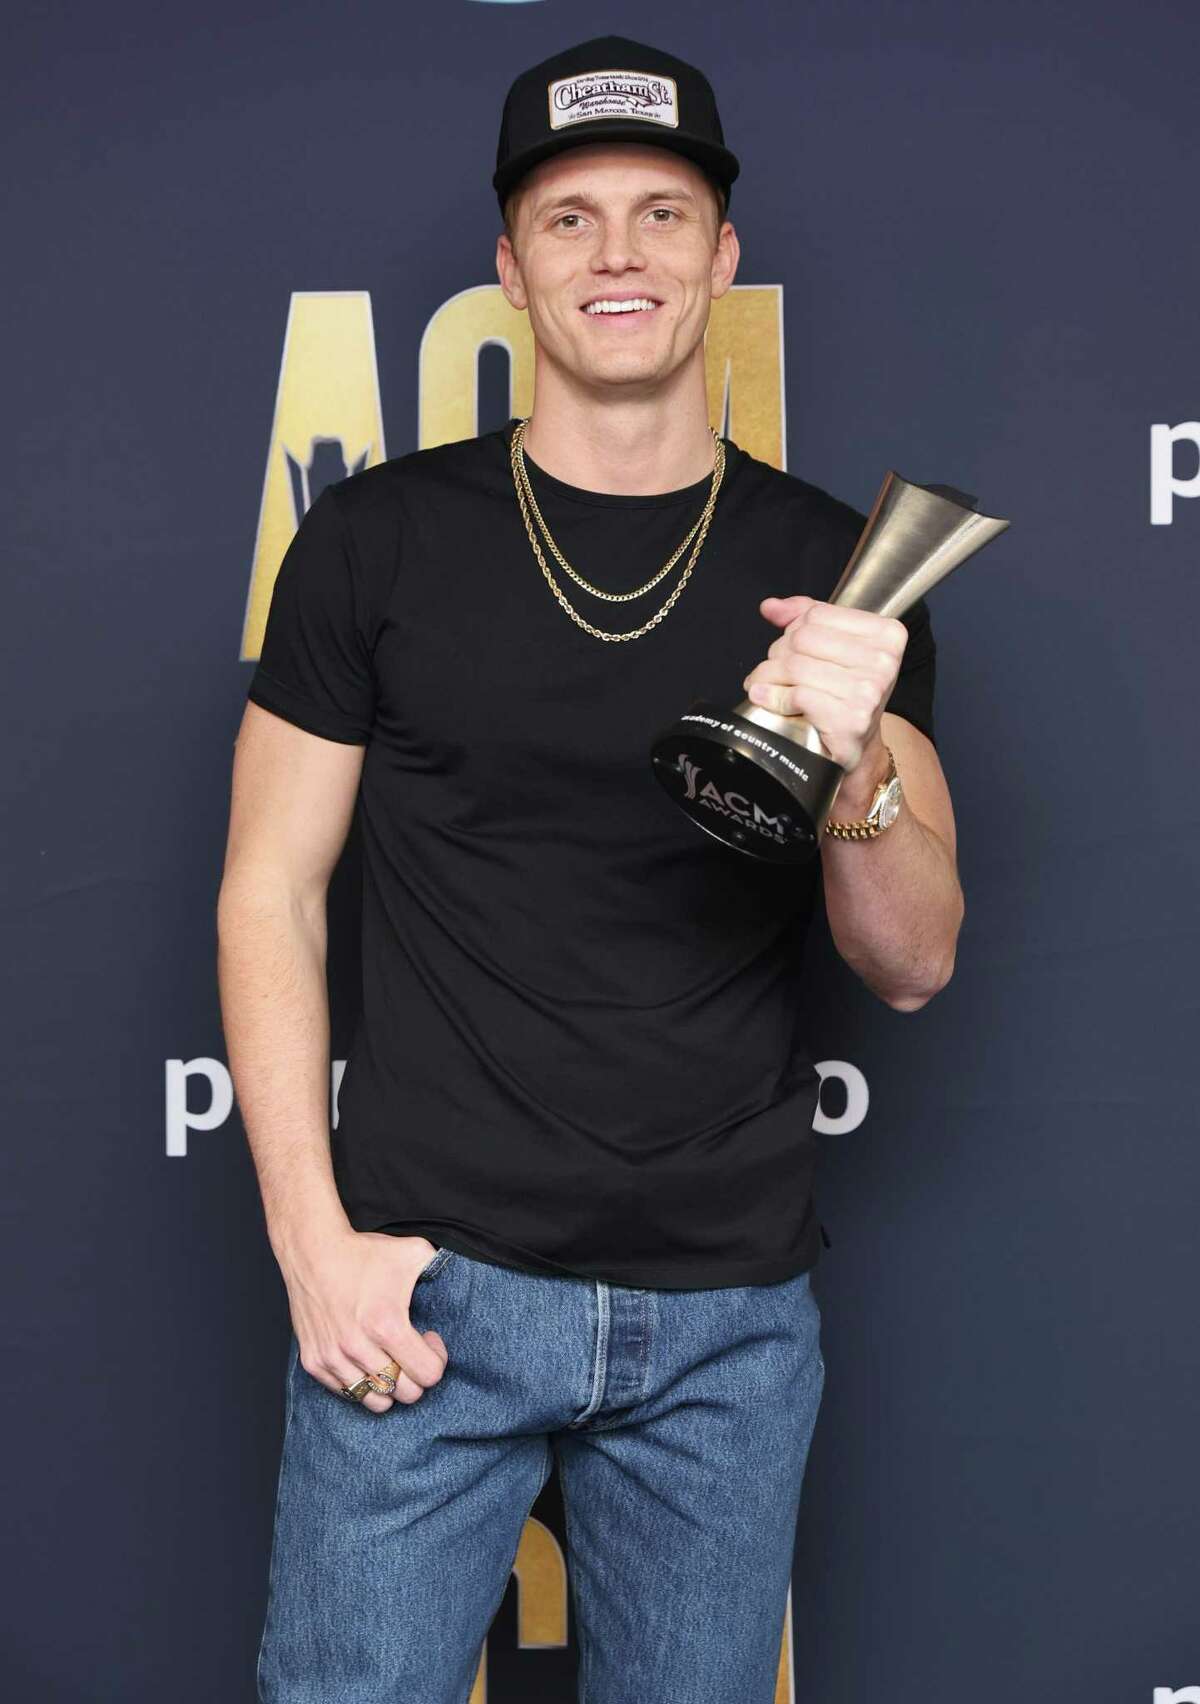 Conroe’s Parker McCollum named ACM’s New Male Artist of the Year